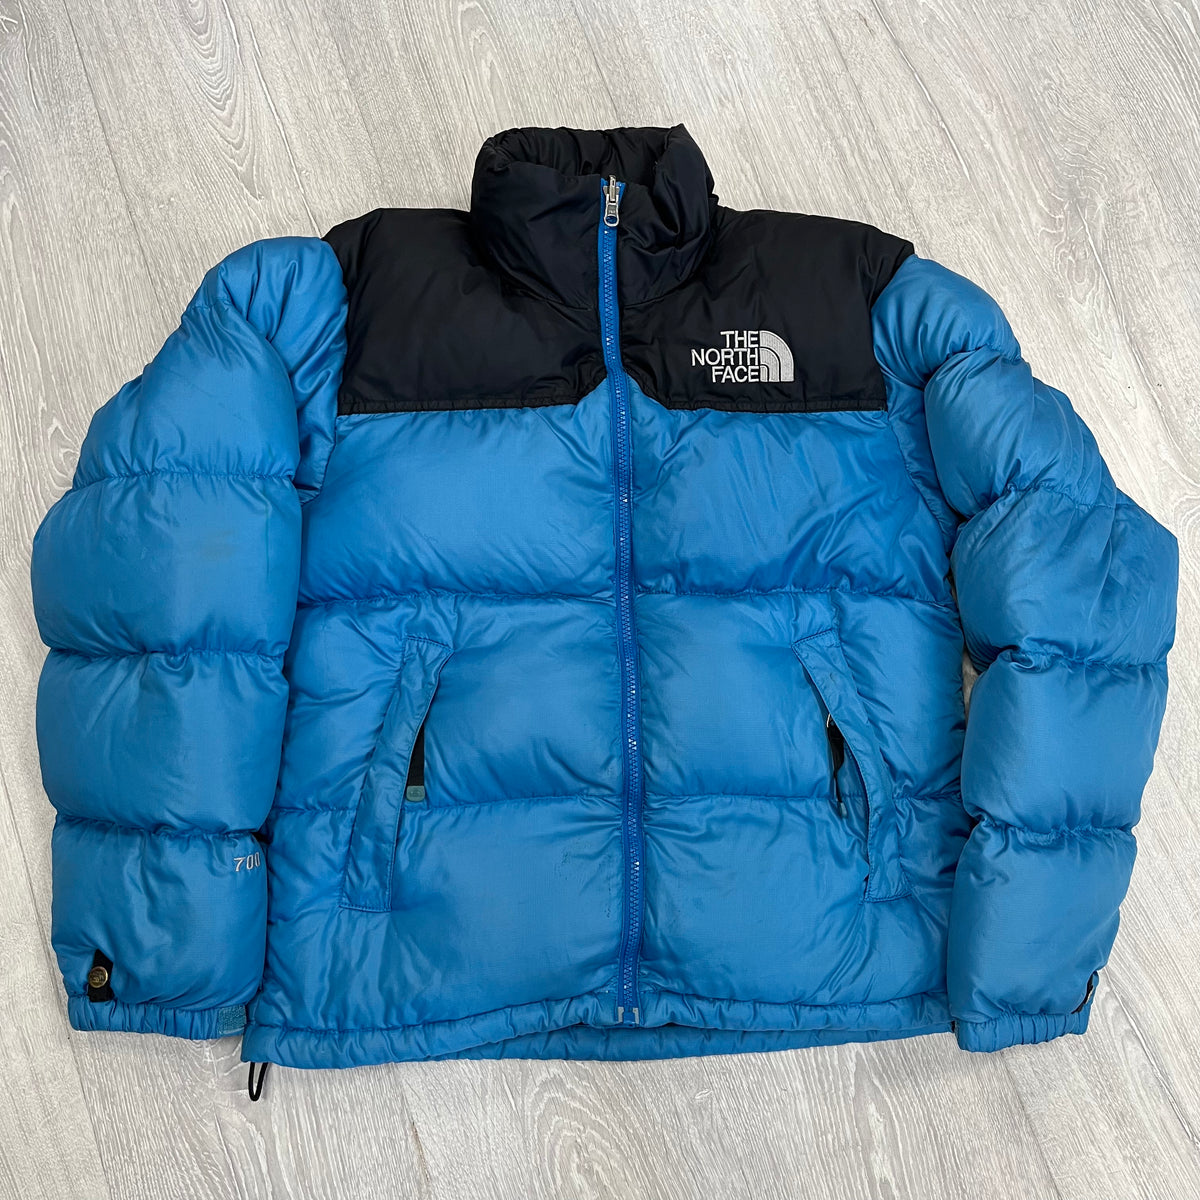 The North Face Baby Blue Puffer Jacket WITH STAIN | We Vintage